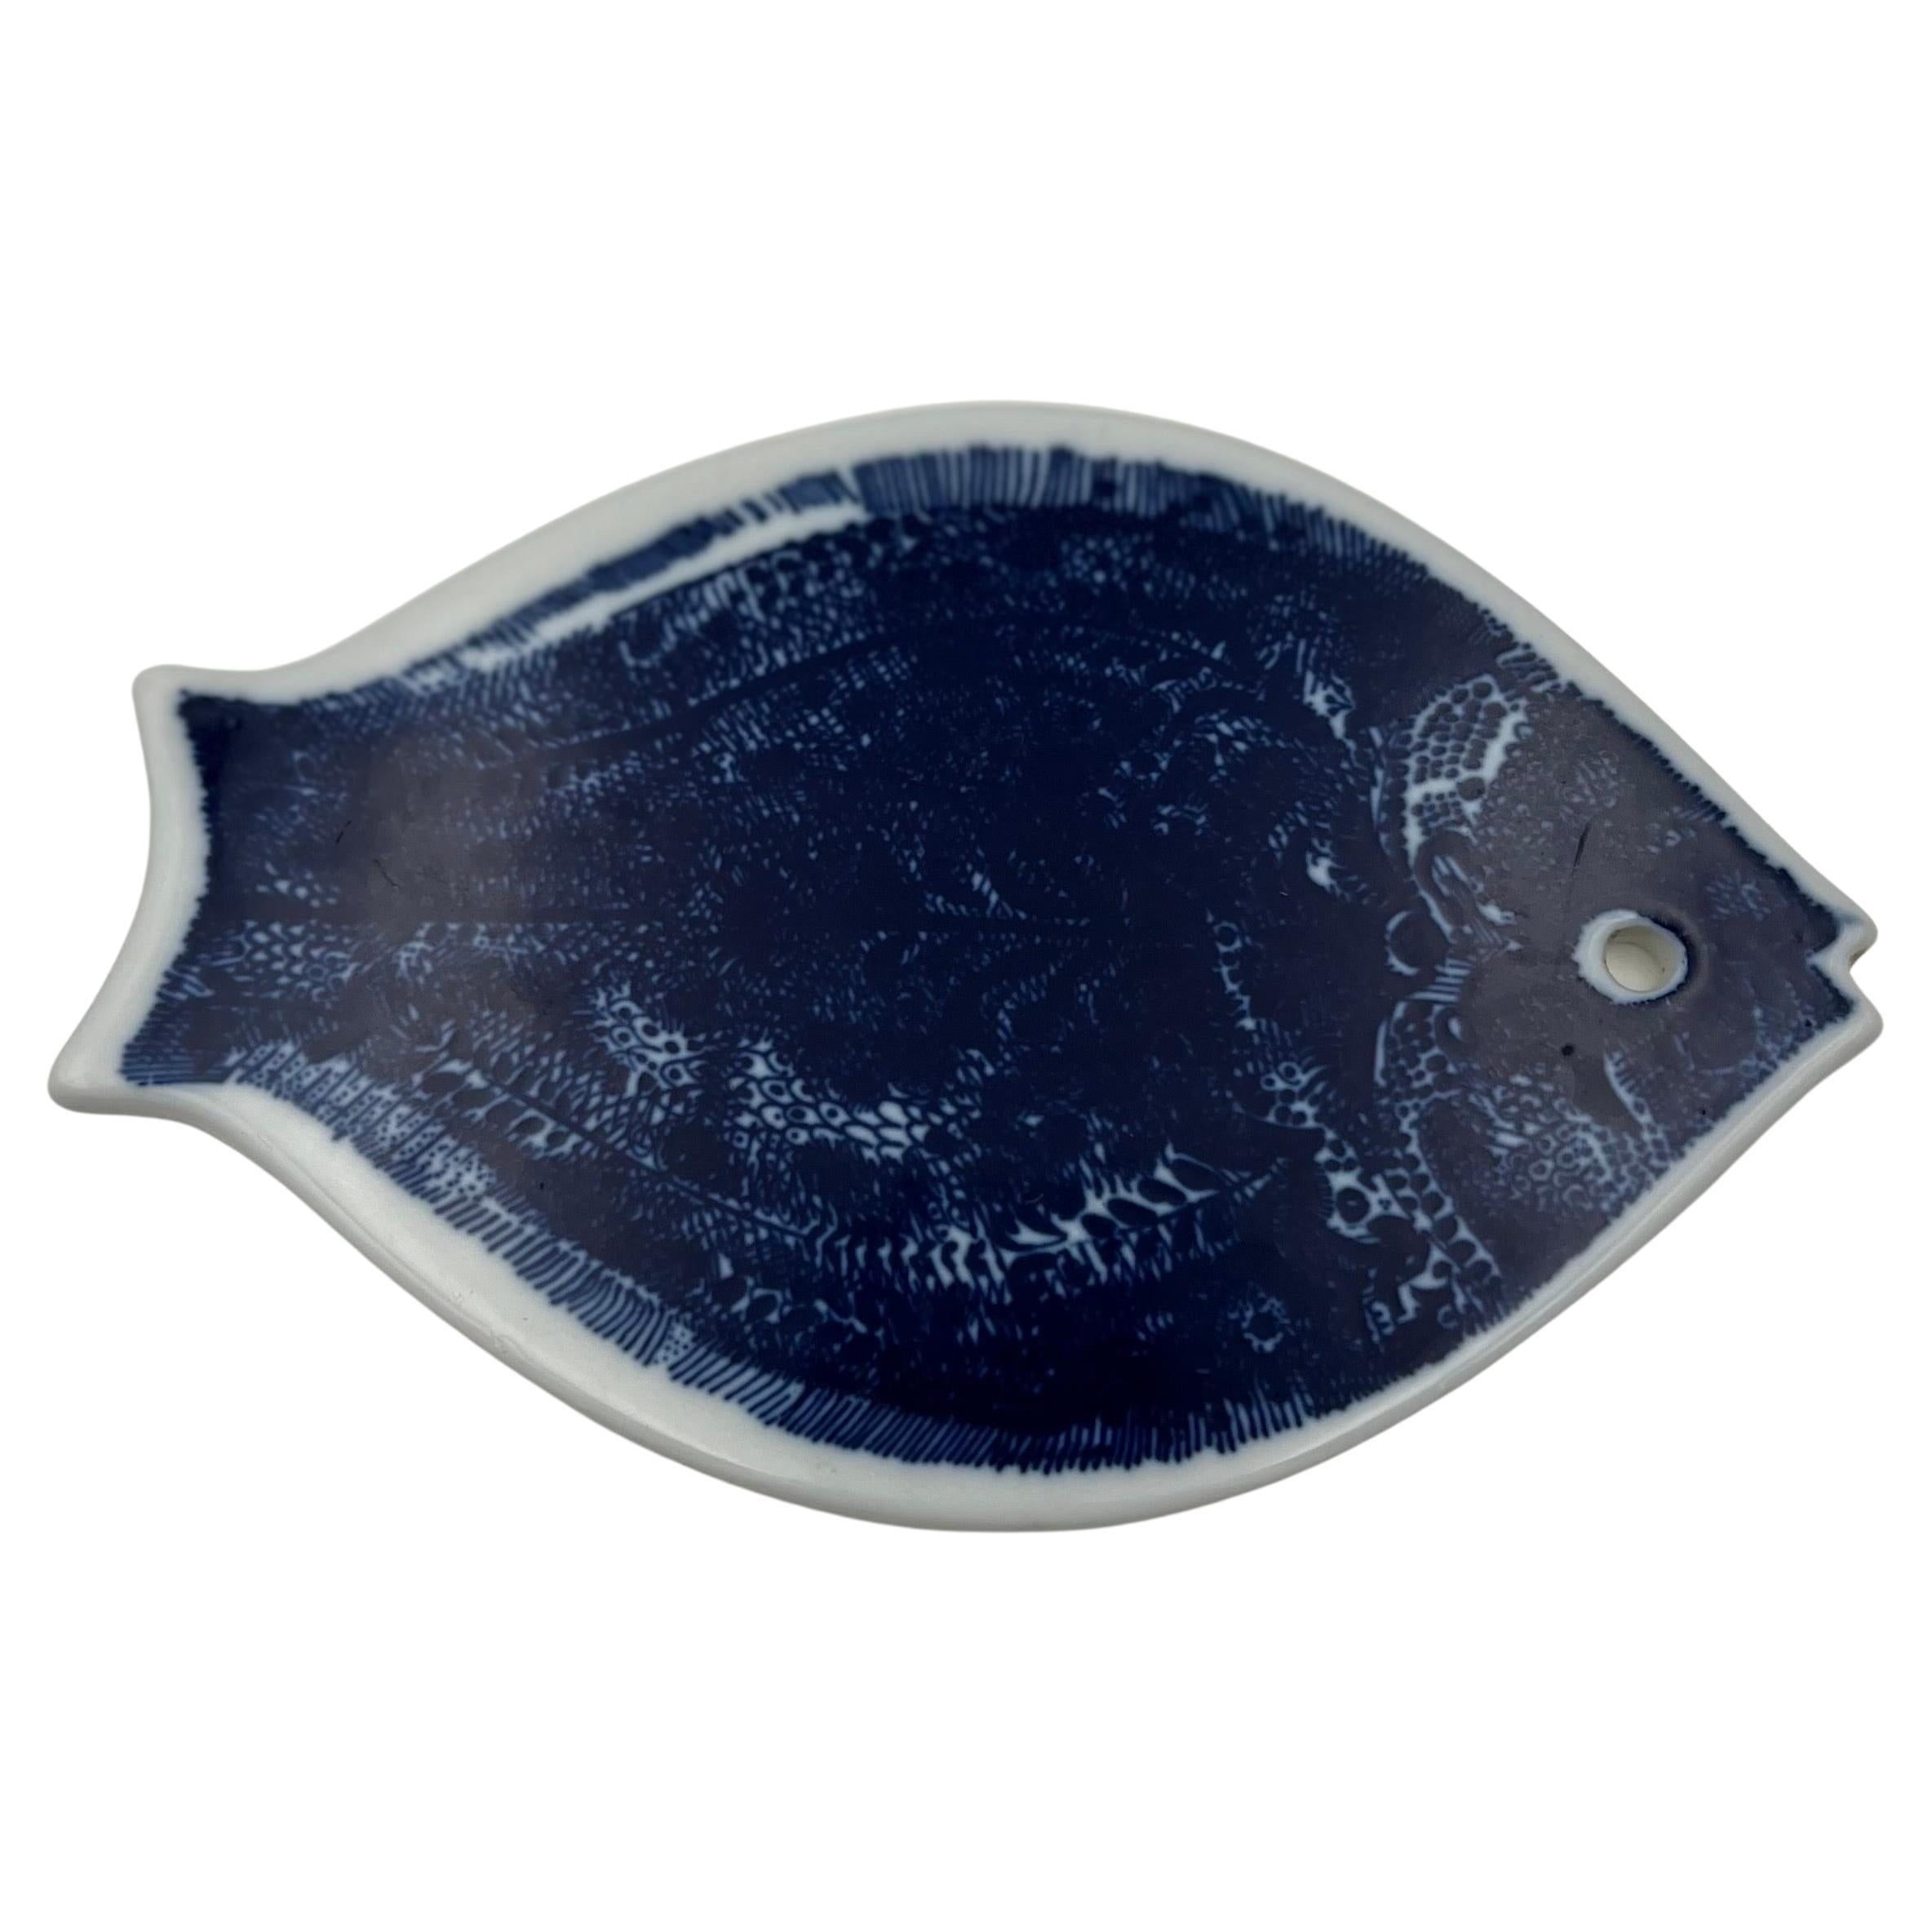 Beautiful elegant Fish Hot plate circa 1950's, made in Norway handpainted in great condition with no chips or cracks.